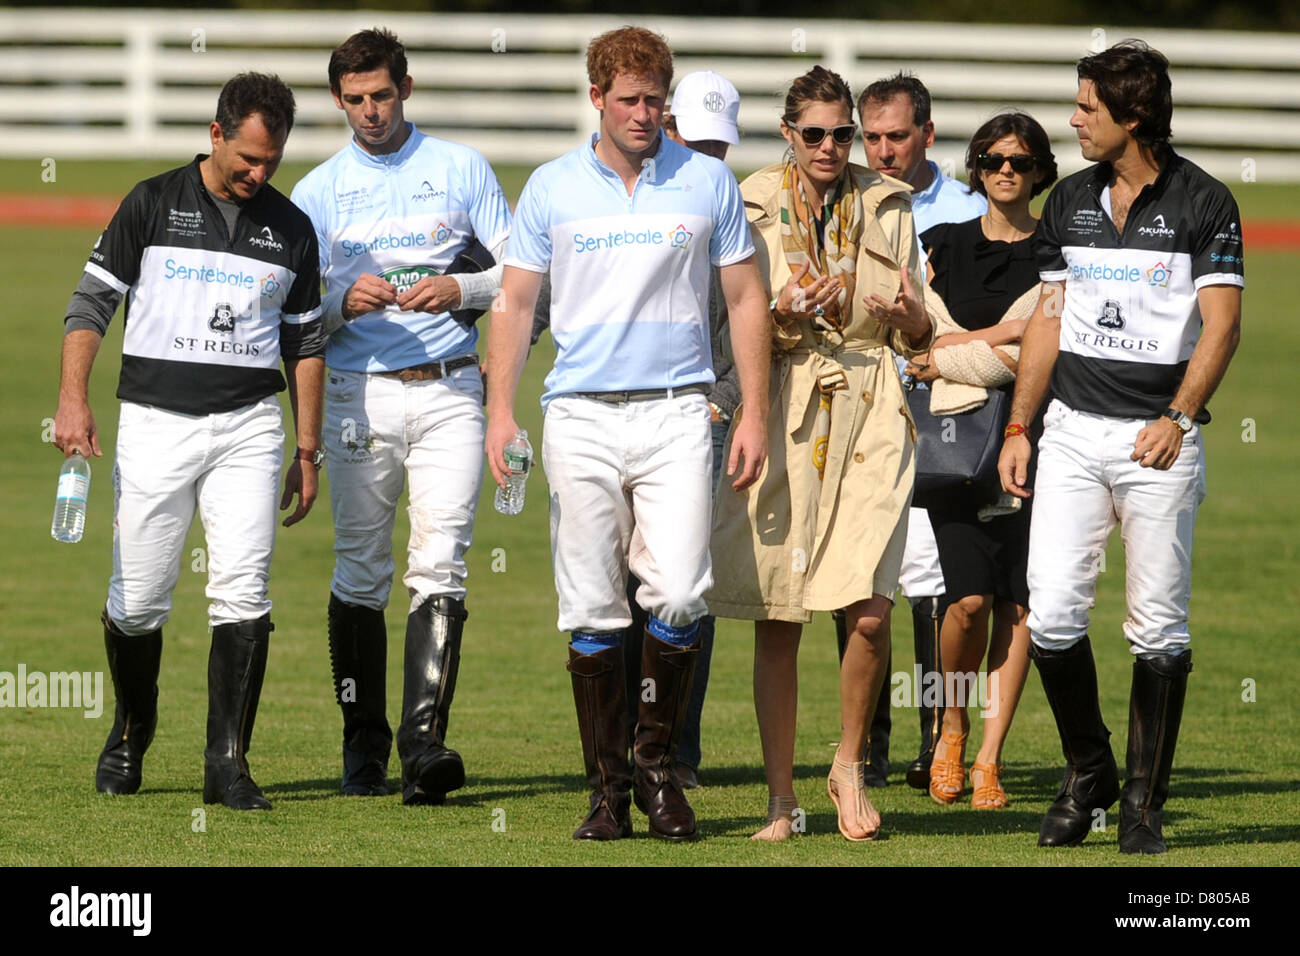 Greenwich, USA.15th May, 2013. Prince Harry, Nacho Figueras and polo plaxers at The Sentebale Royal Salute Polo Cup at The Greenwich Polo Club.Credit:DPA/Alamy Live News Stock Photo